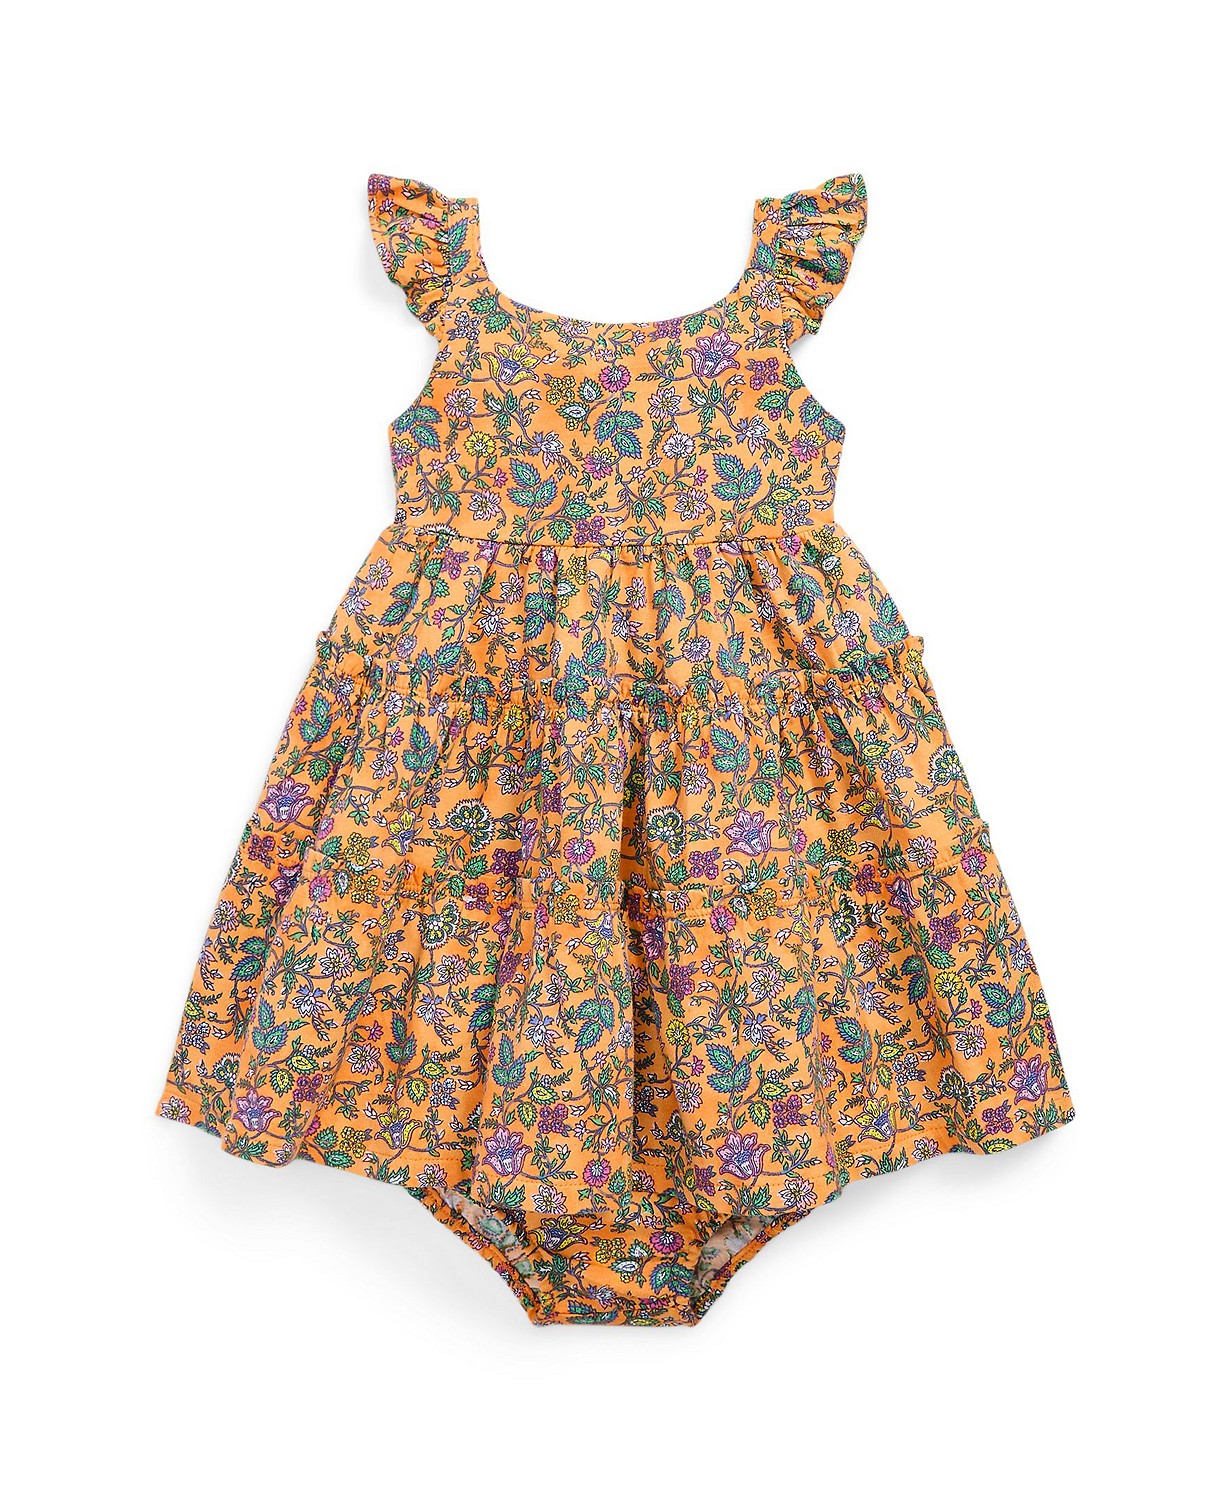 Baby Girls Floral Ruffled Cotton Dress and Bloomer Set